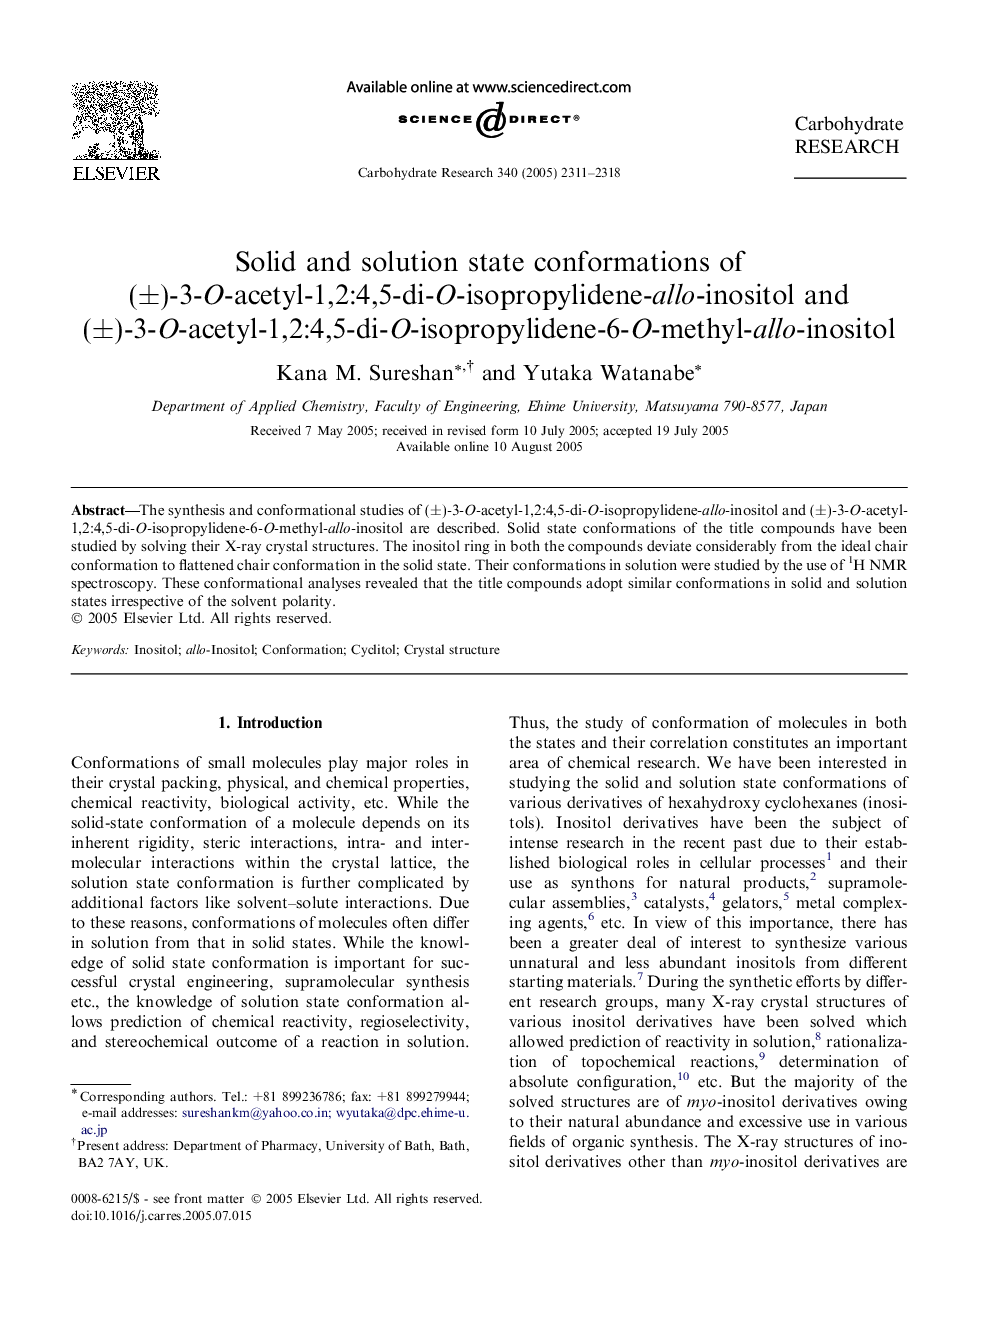 Solid and solution state conformations of (±)-3-O-acetyl-1,2:4,5-di-O-isopropylidene-allo-inositol and (±)-3-O-acetyl-1,2:4,5-di-O-isopropylidene-6-O-methyl-allo-inositol